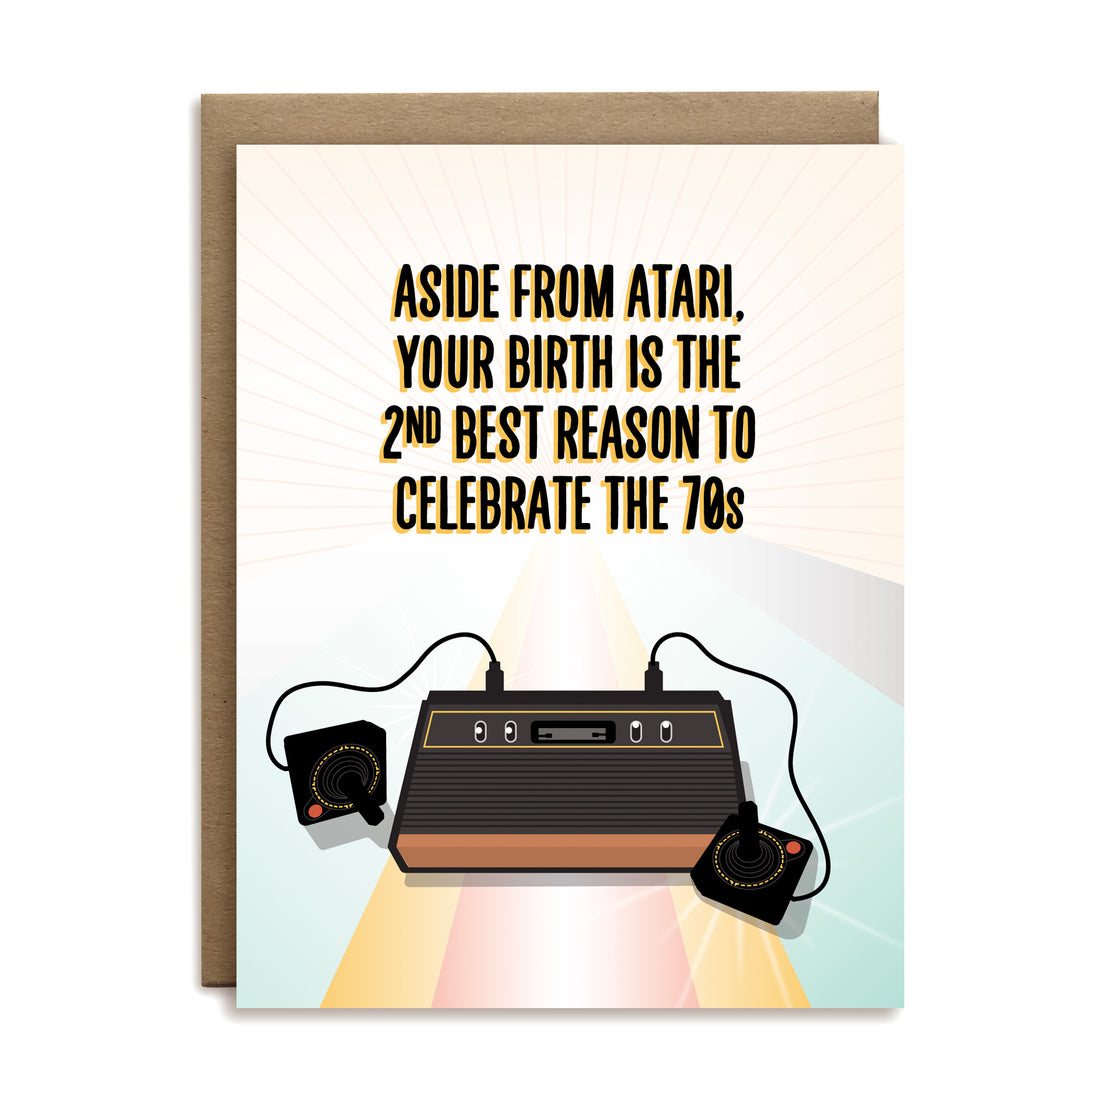 Aside from Atari, your birth is the 2nd best reason to celebrate the 70s birthday greeting card by I’ll Know It When I See It